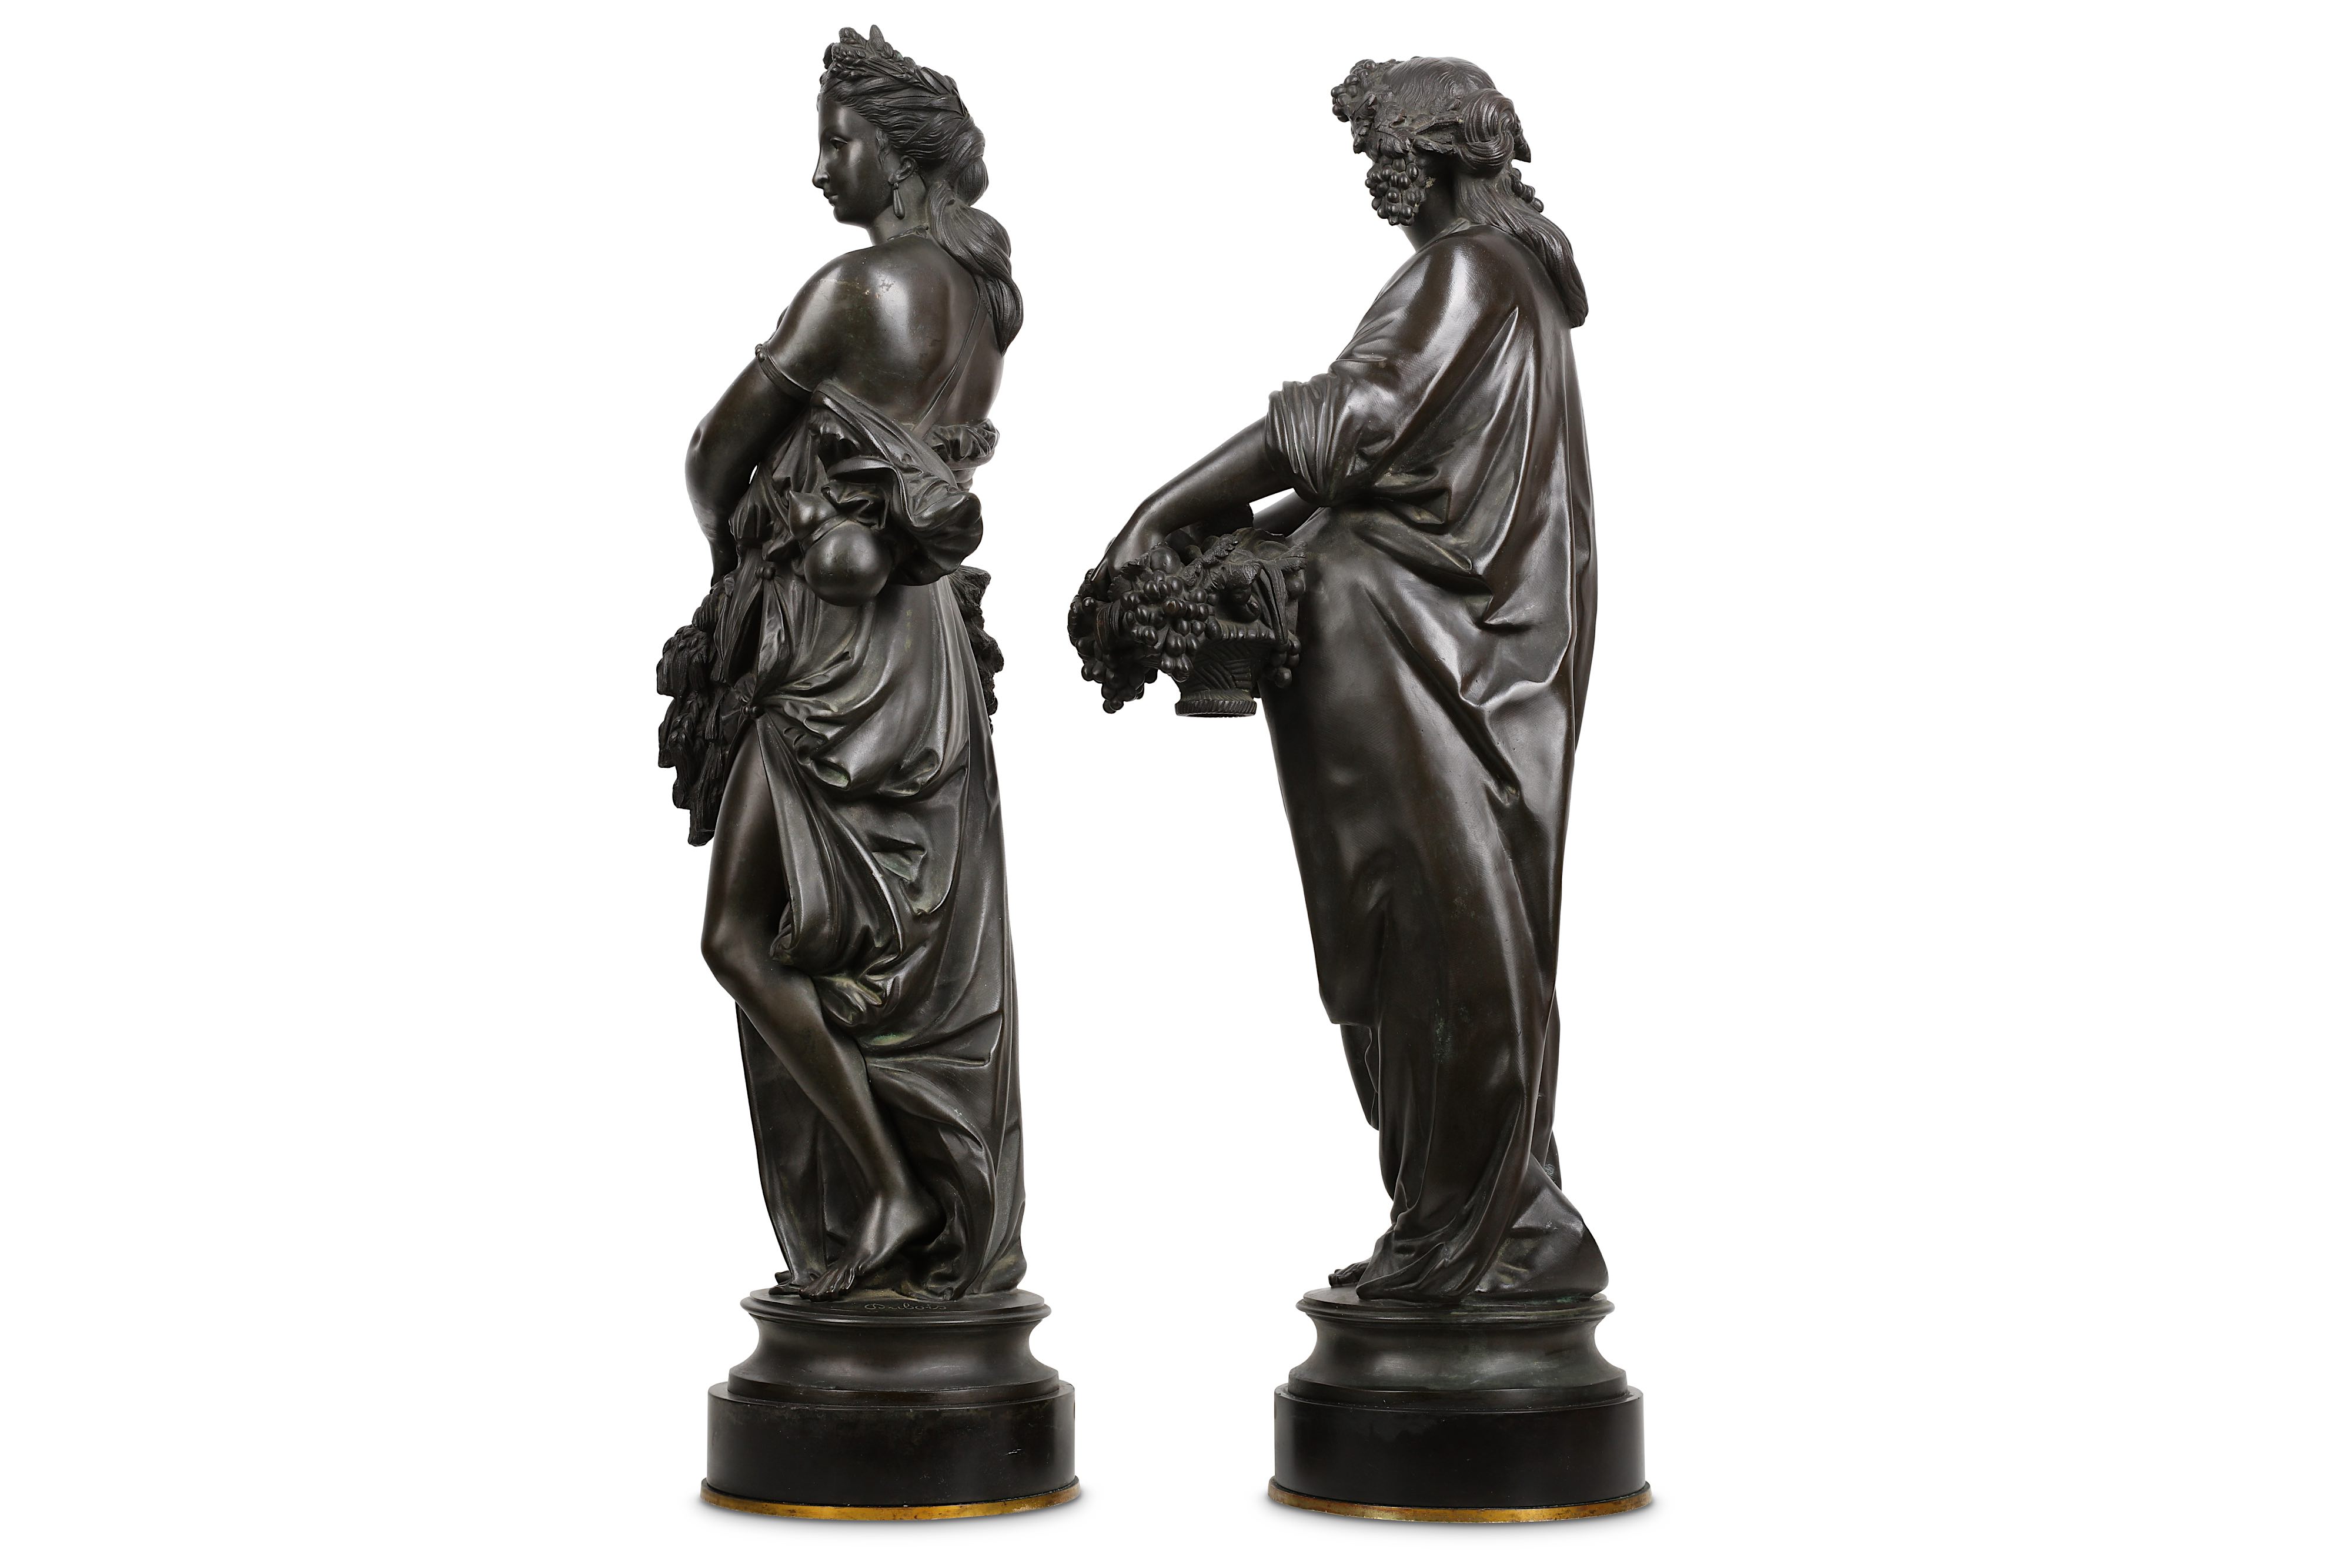 PAUL DUBOIS (FRENCH, 1829-1905): A PAIR OF BRONZE FIGURES OF MAIDENS - Image 4 of 6